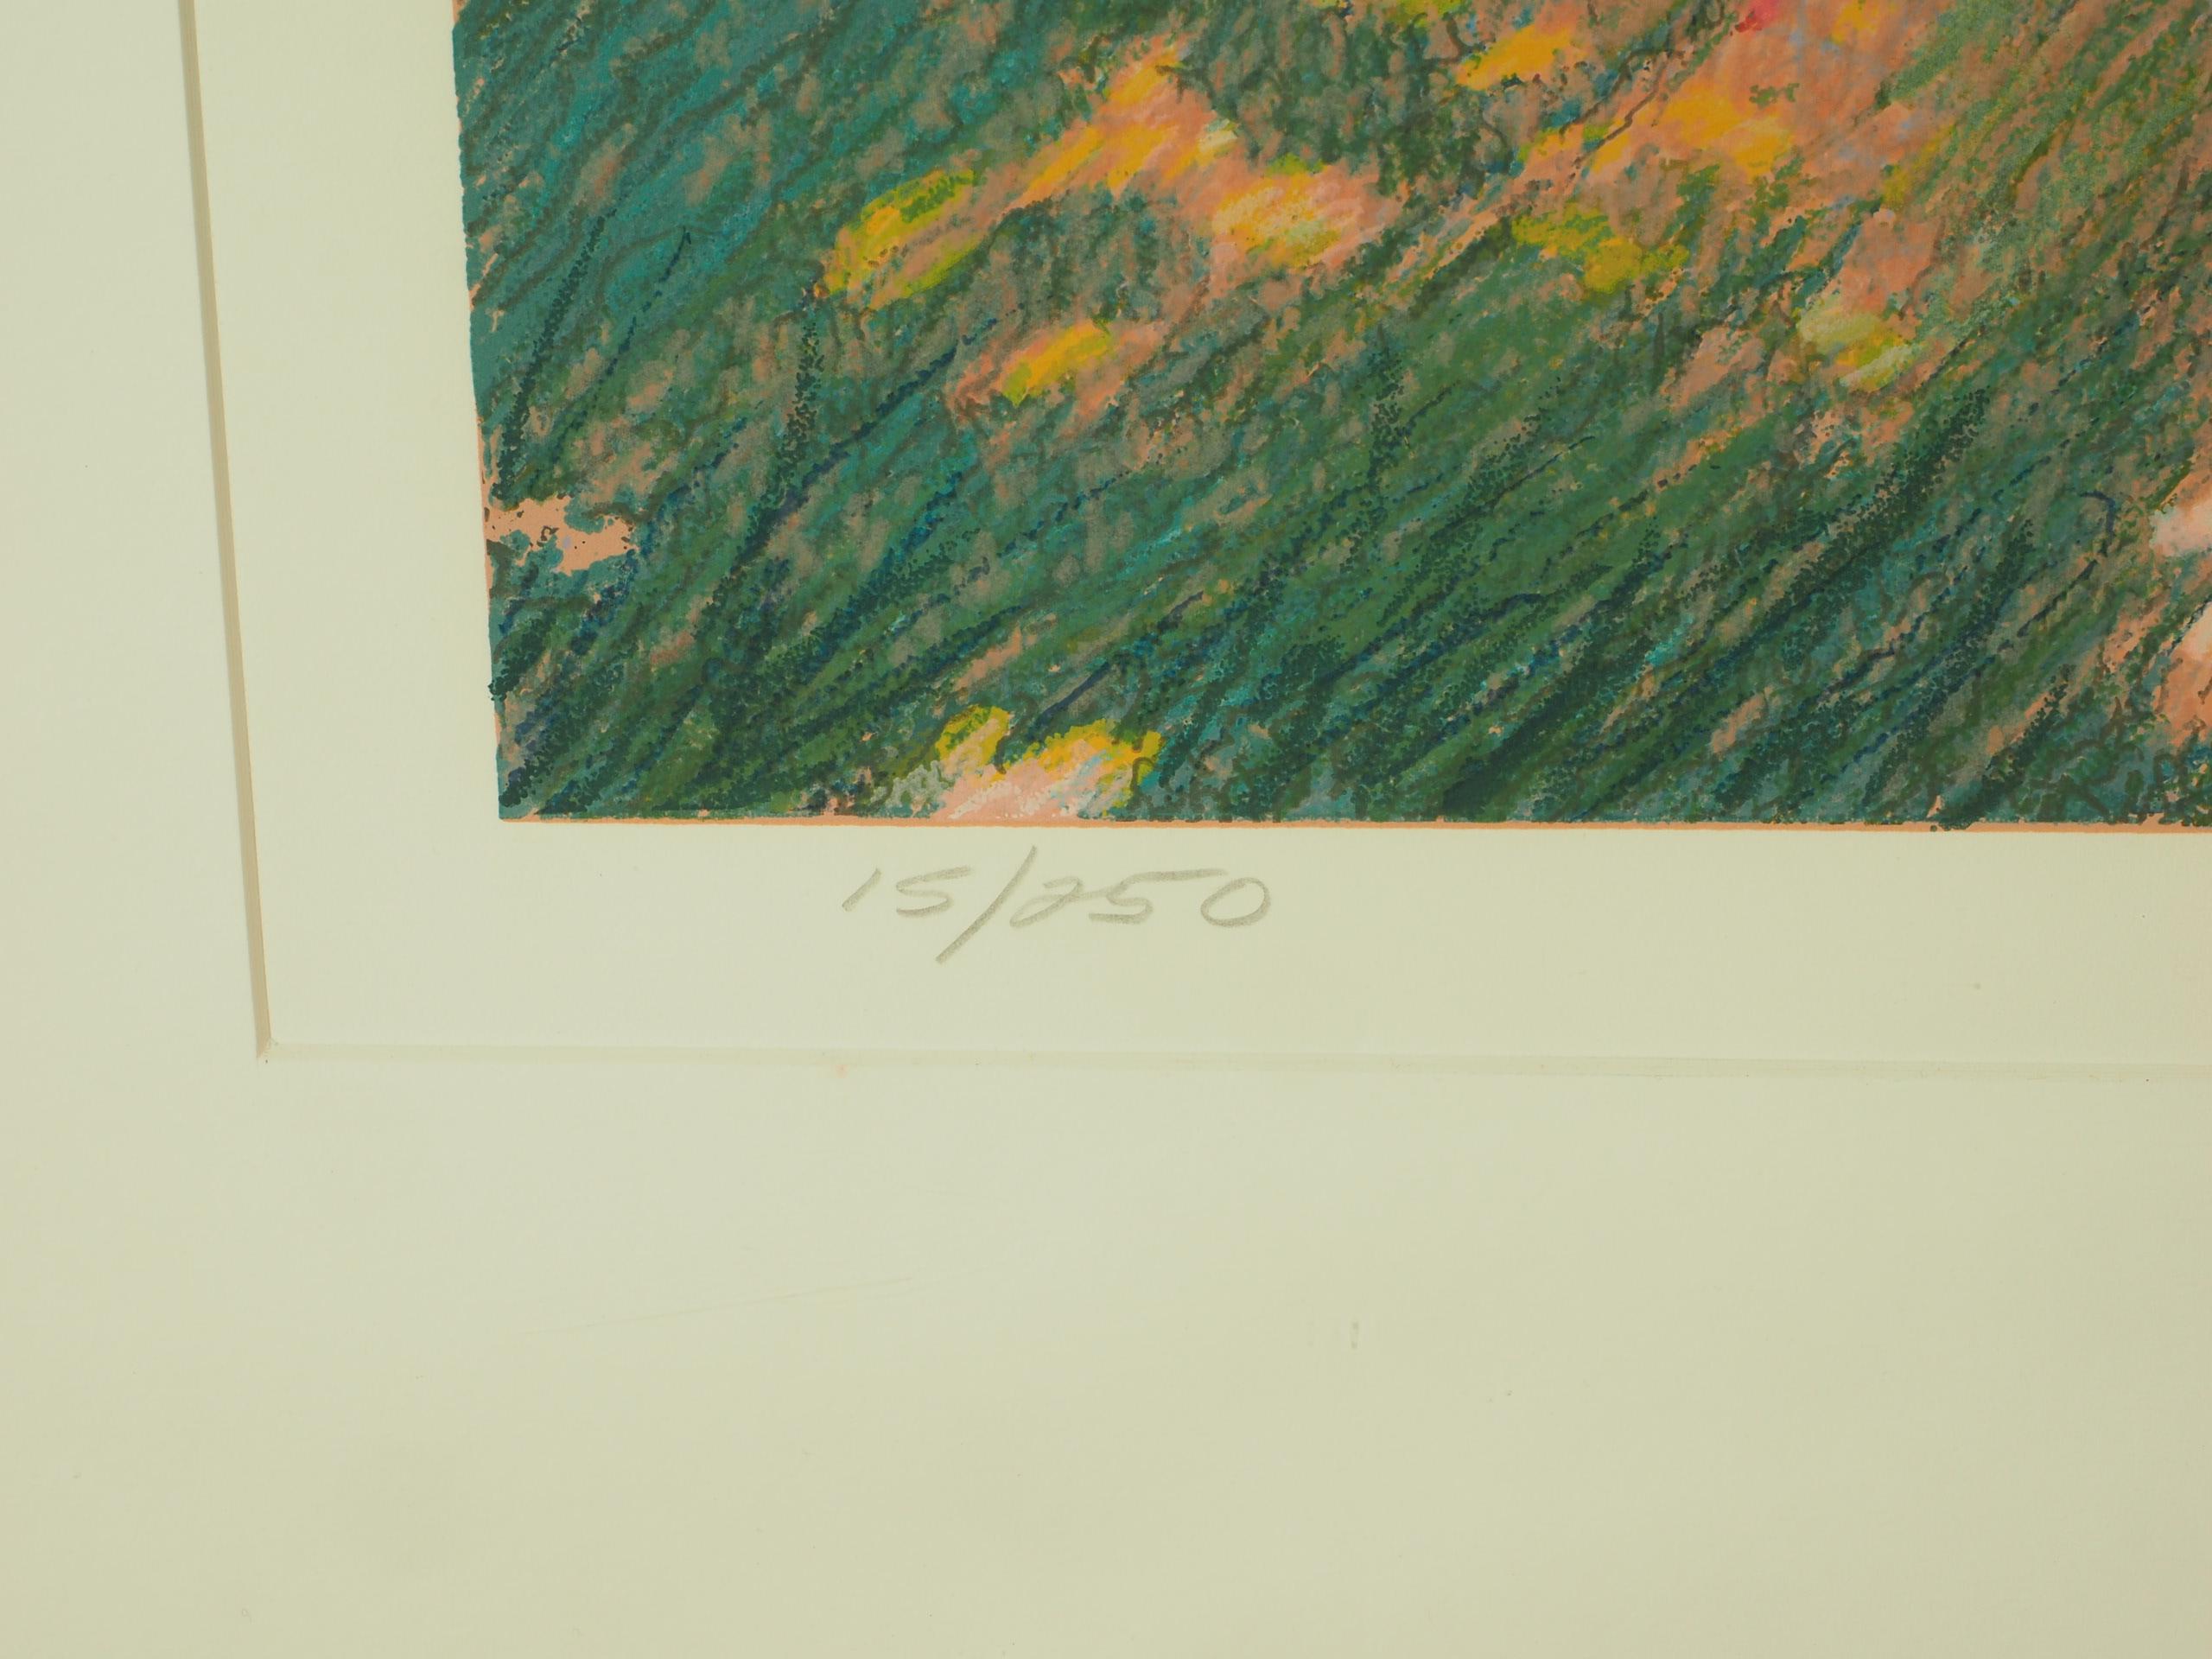 Mid-Century Modern Wall-Sized Carson Gladson Signed and Numbered Lithograph, 